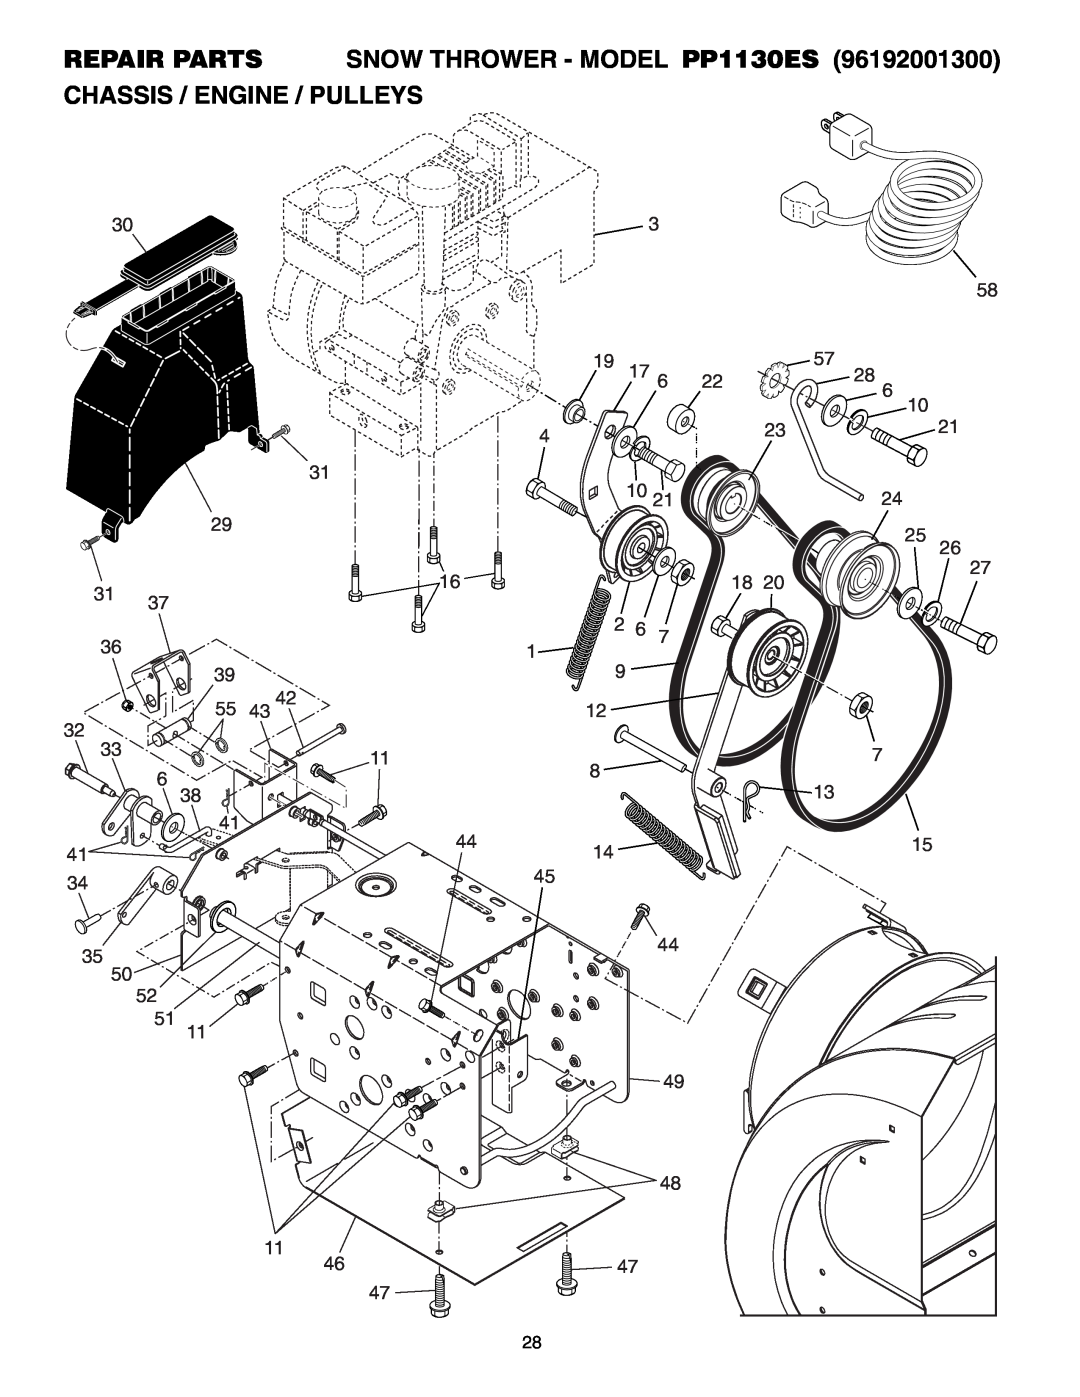 Poulan 96192001300, 406275 owner manual REPAIR PARTS SNOW THROWER - MODEL PP1130ES CHASSIS / ENGINE / PULLEYS 